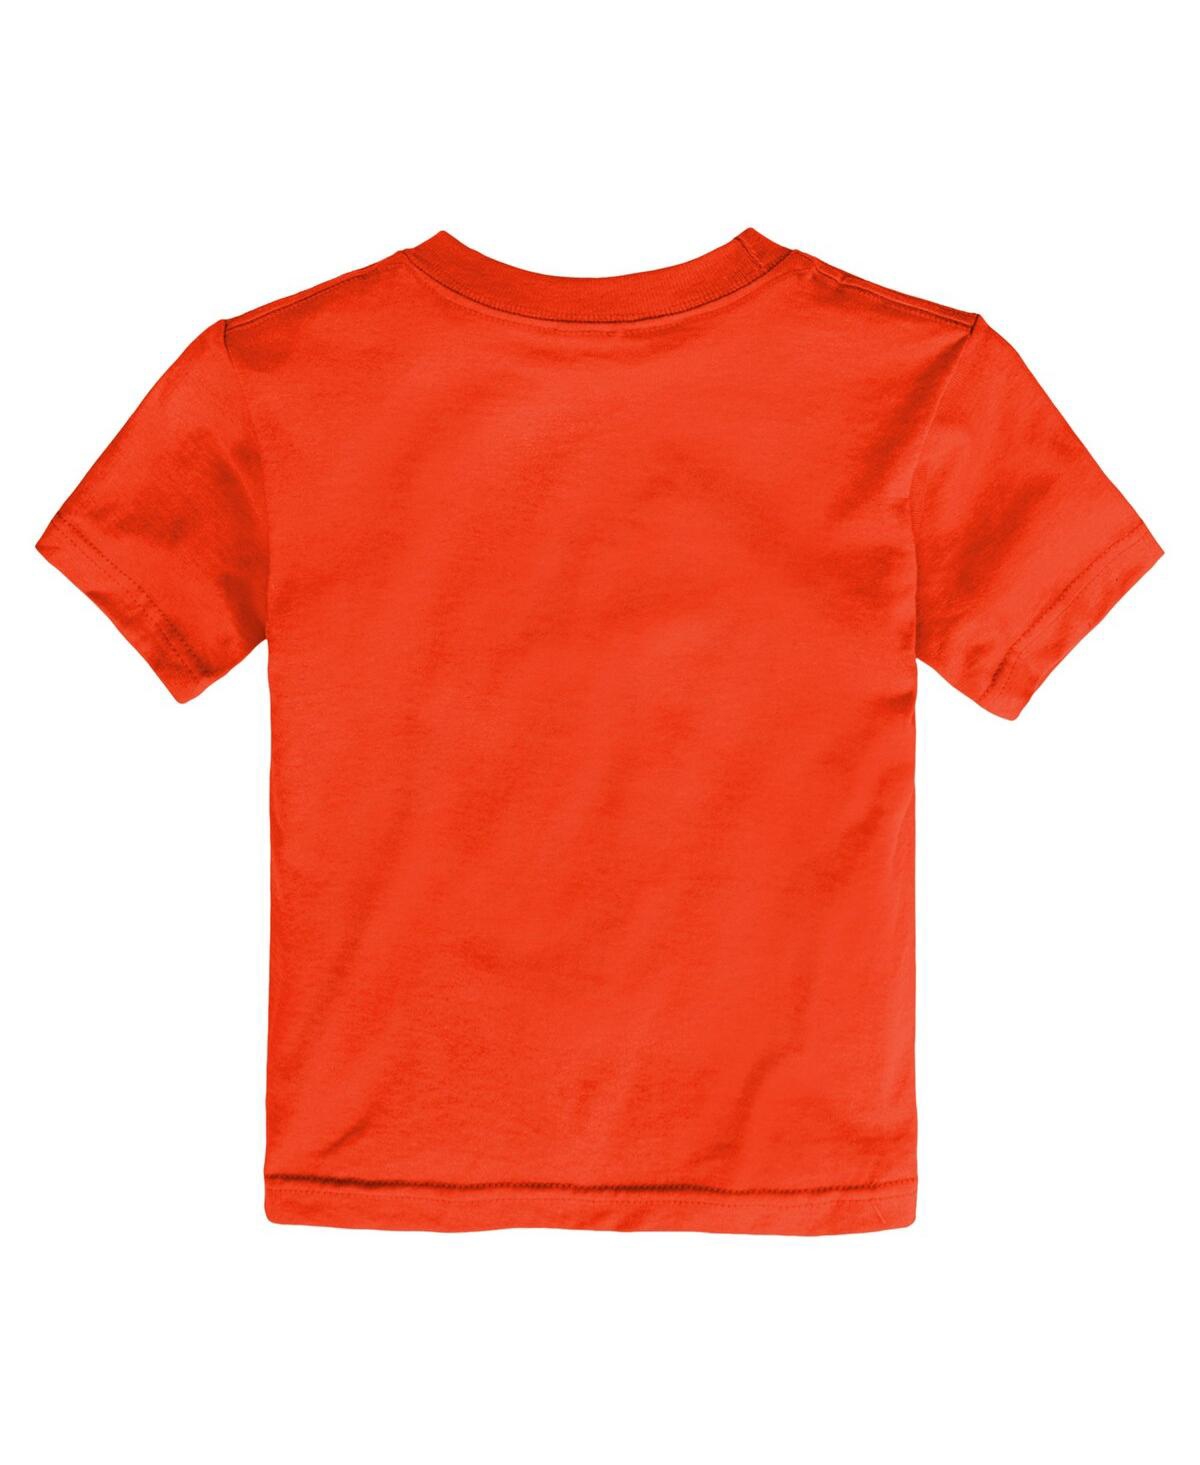 Shop Nike Toddler Boys And Girls  Orange San Francisco Giants City Connect Graphic T-shirt